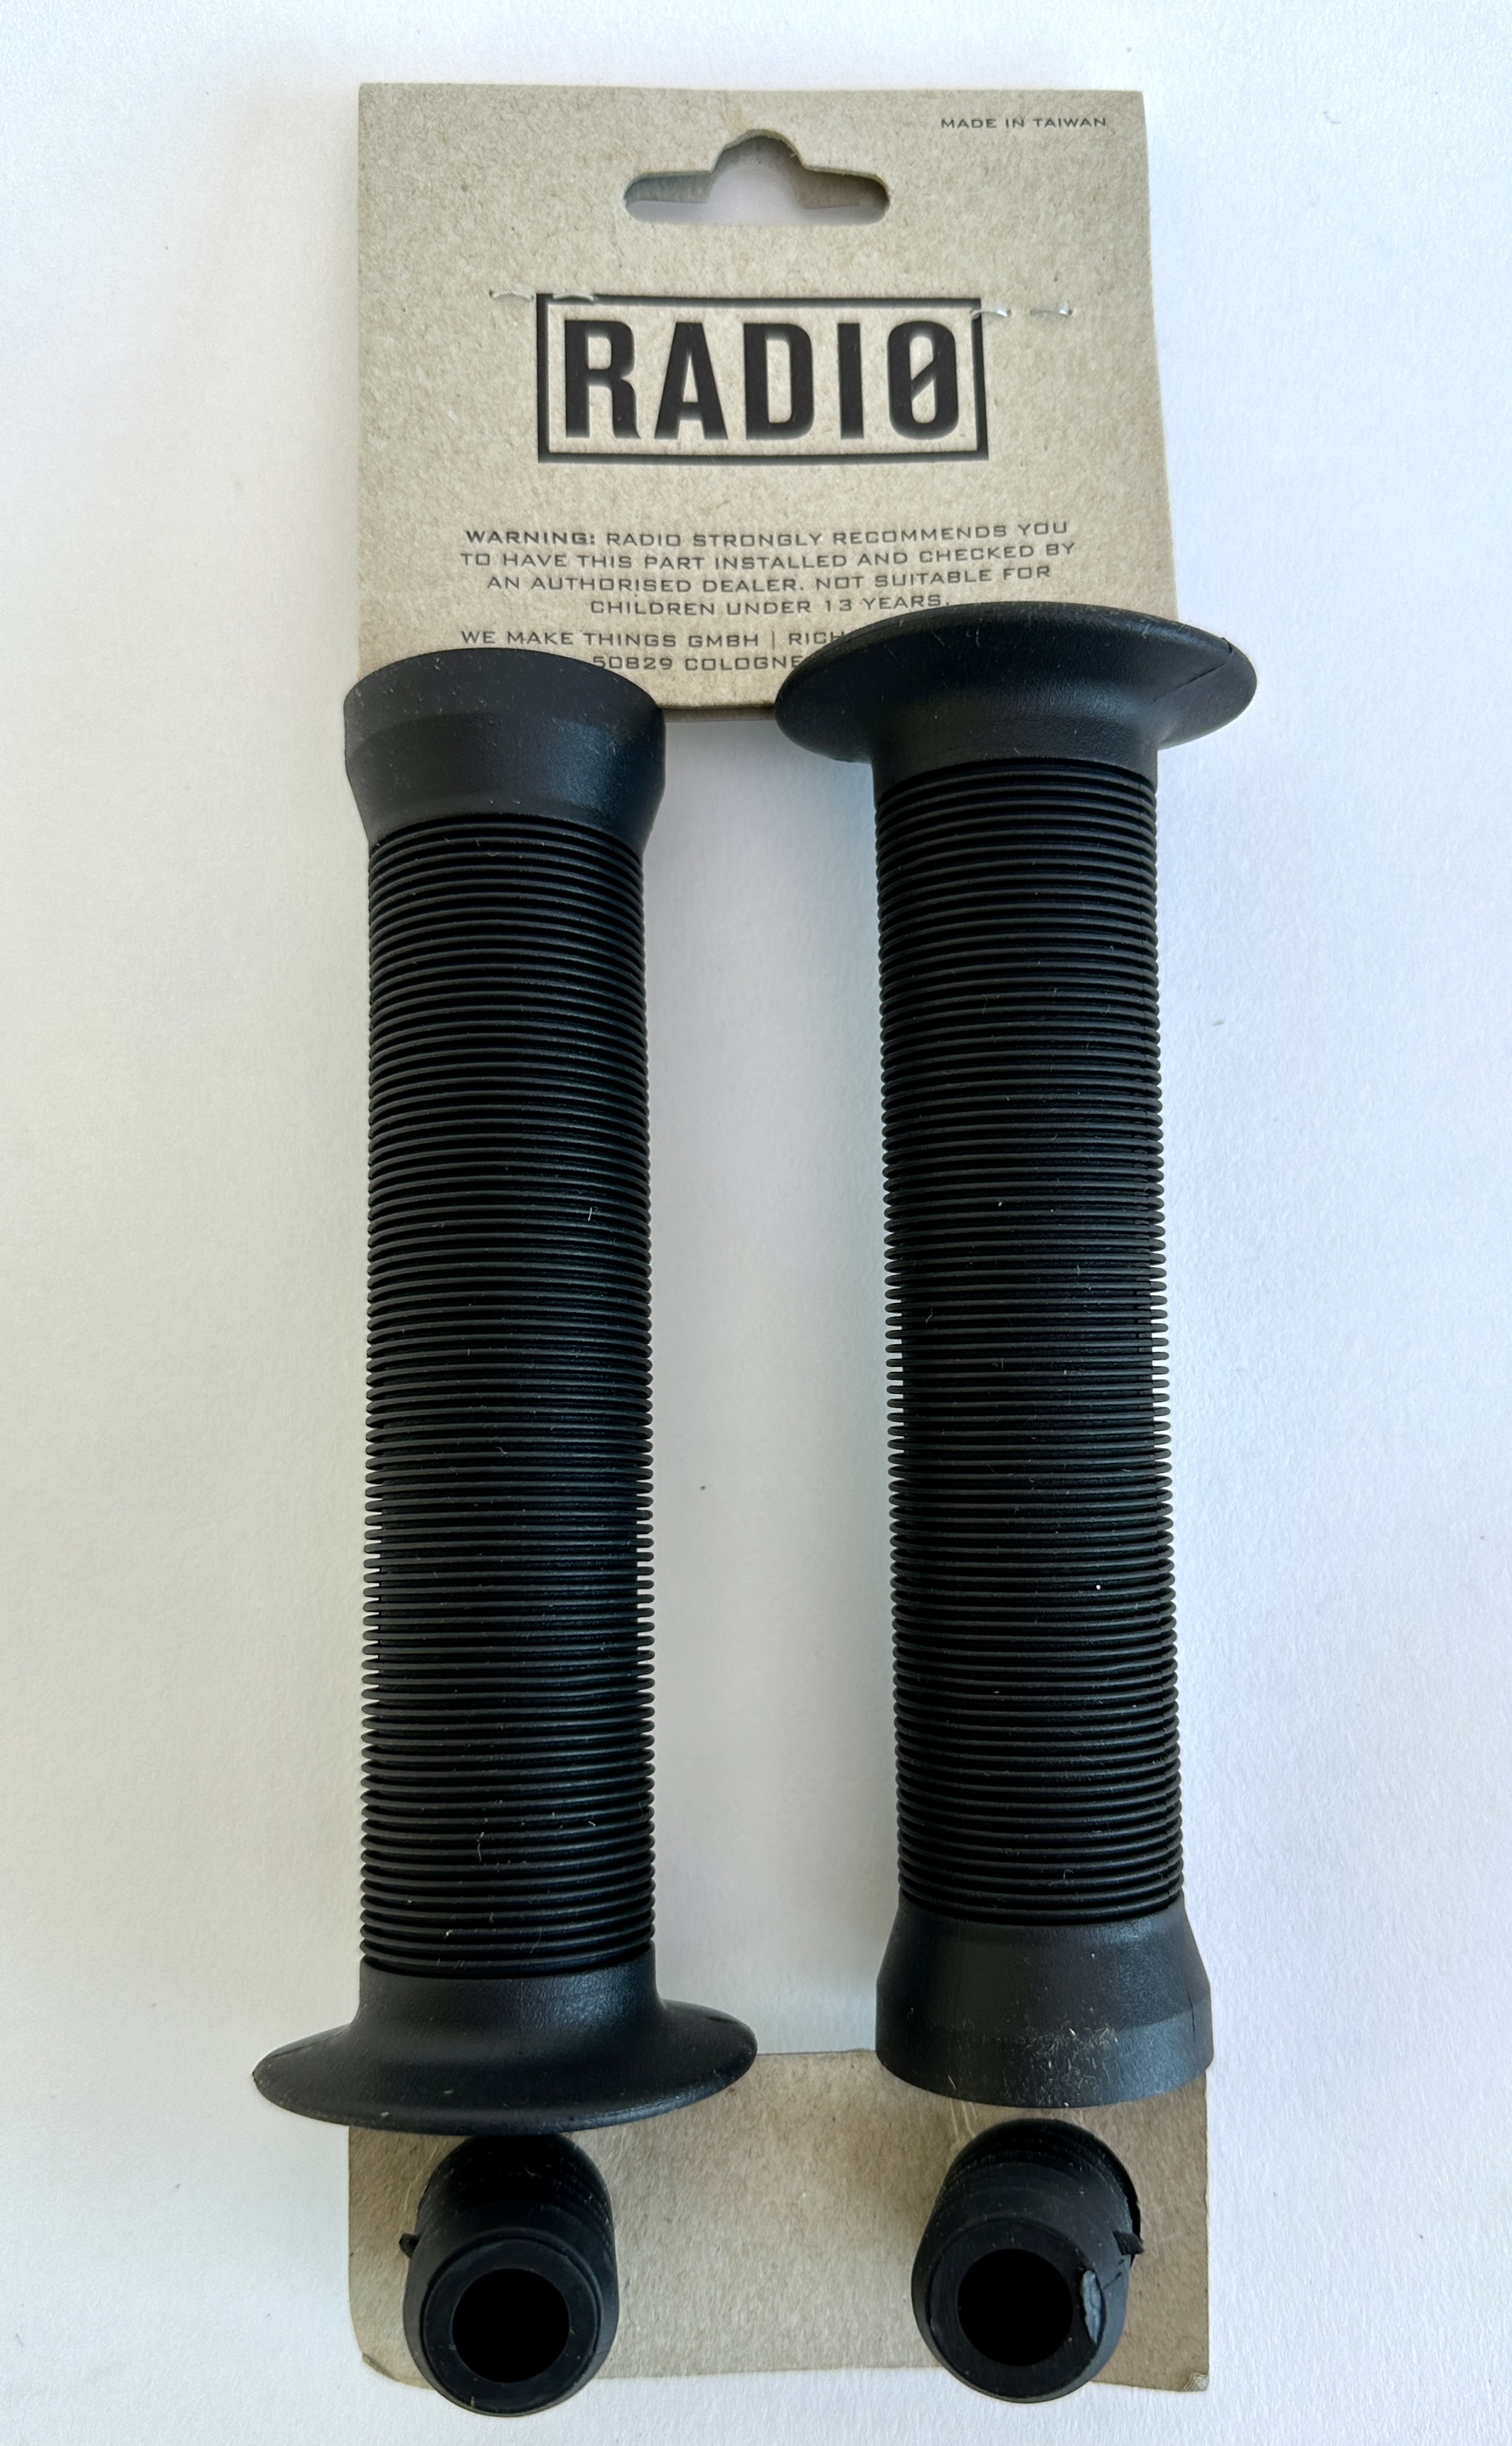 UD Long grips for handlebar made of rubber, black